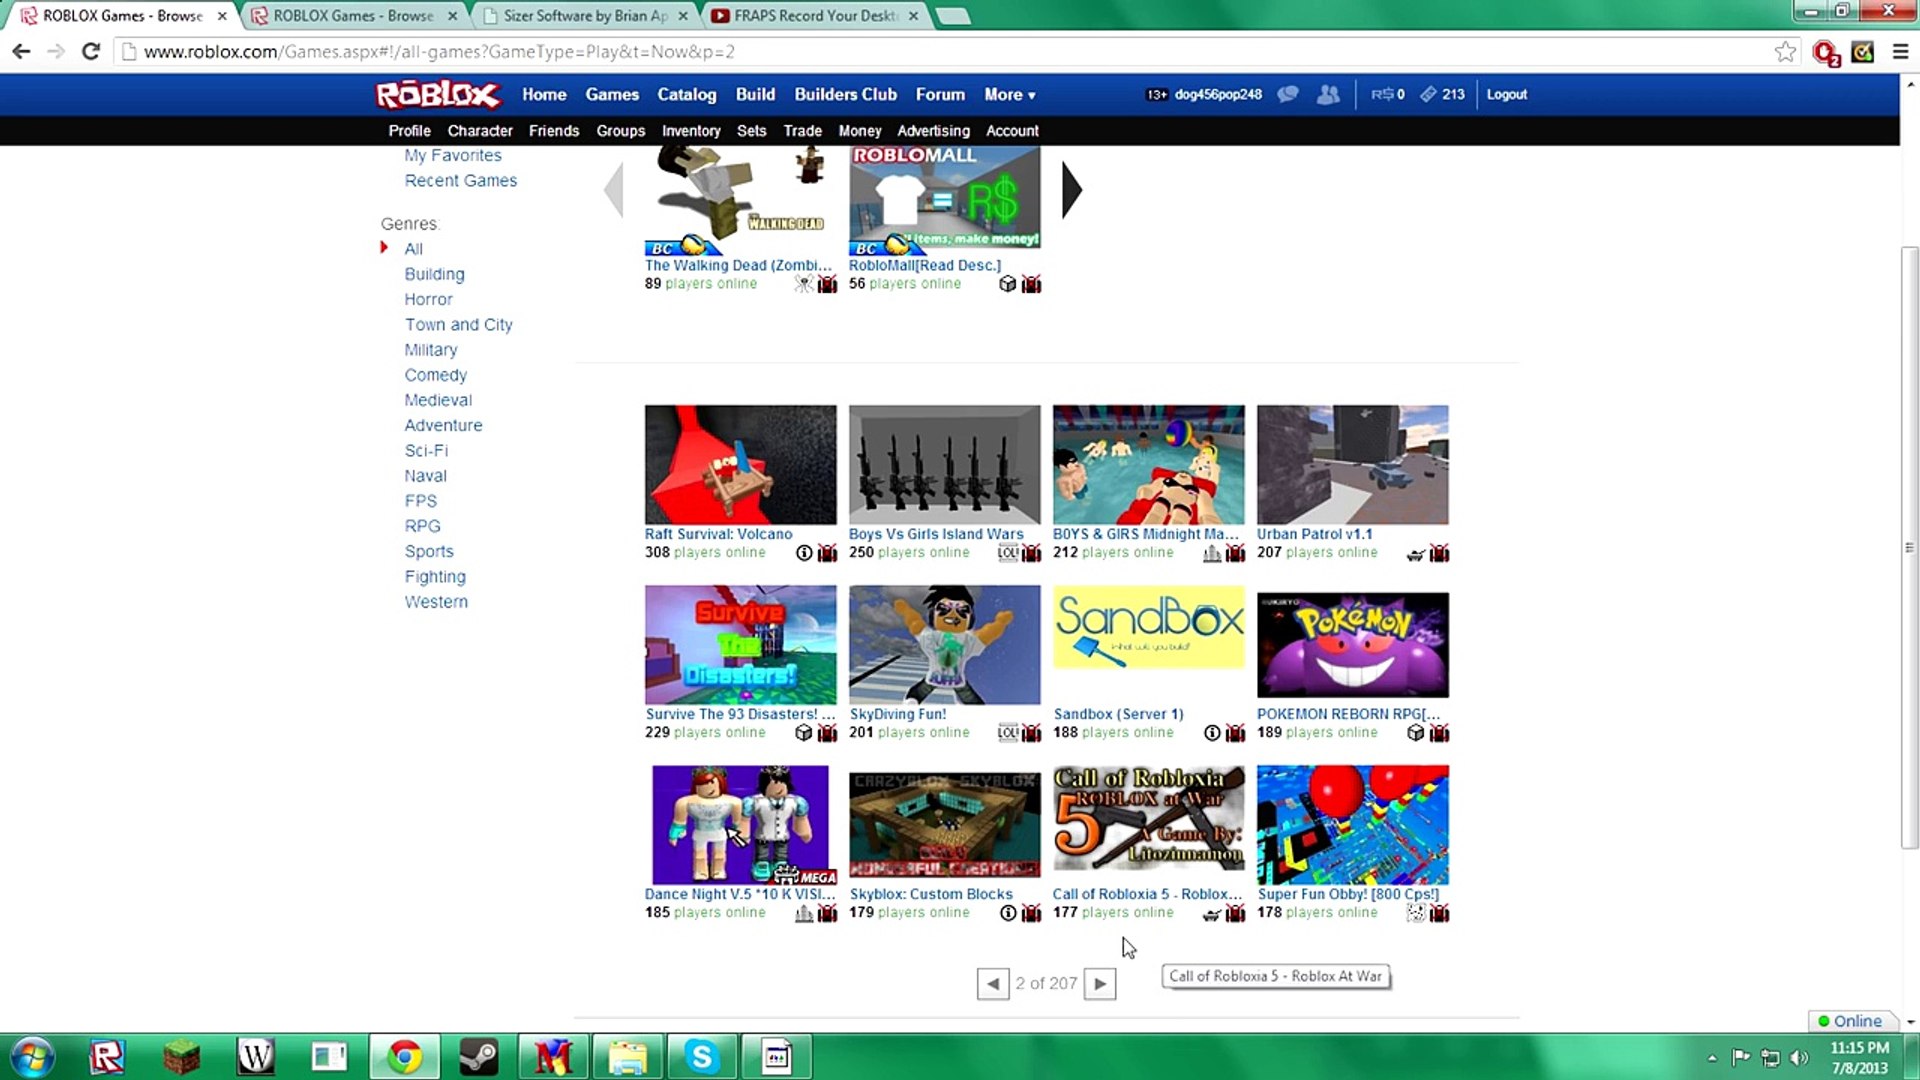 Mussilman234 How To Get A Girlfriend On Roblox - top videos from roblox games web page 177